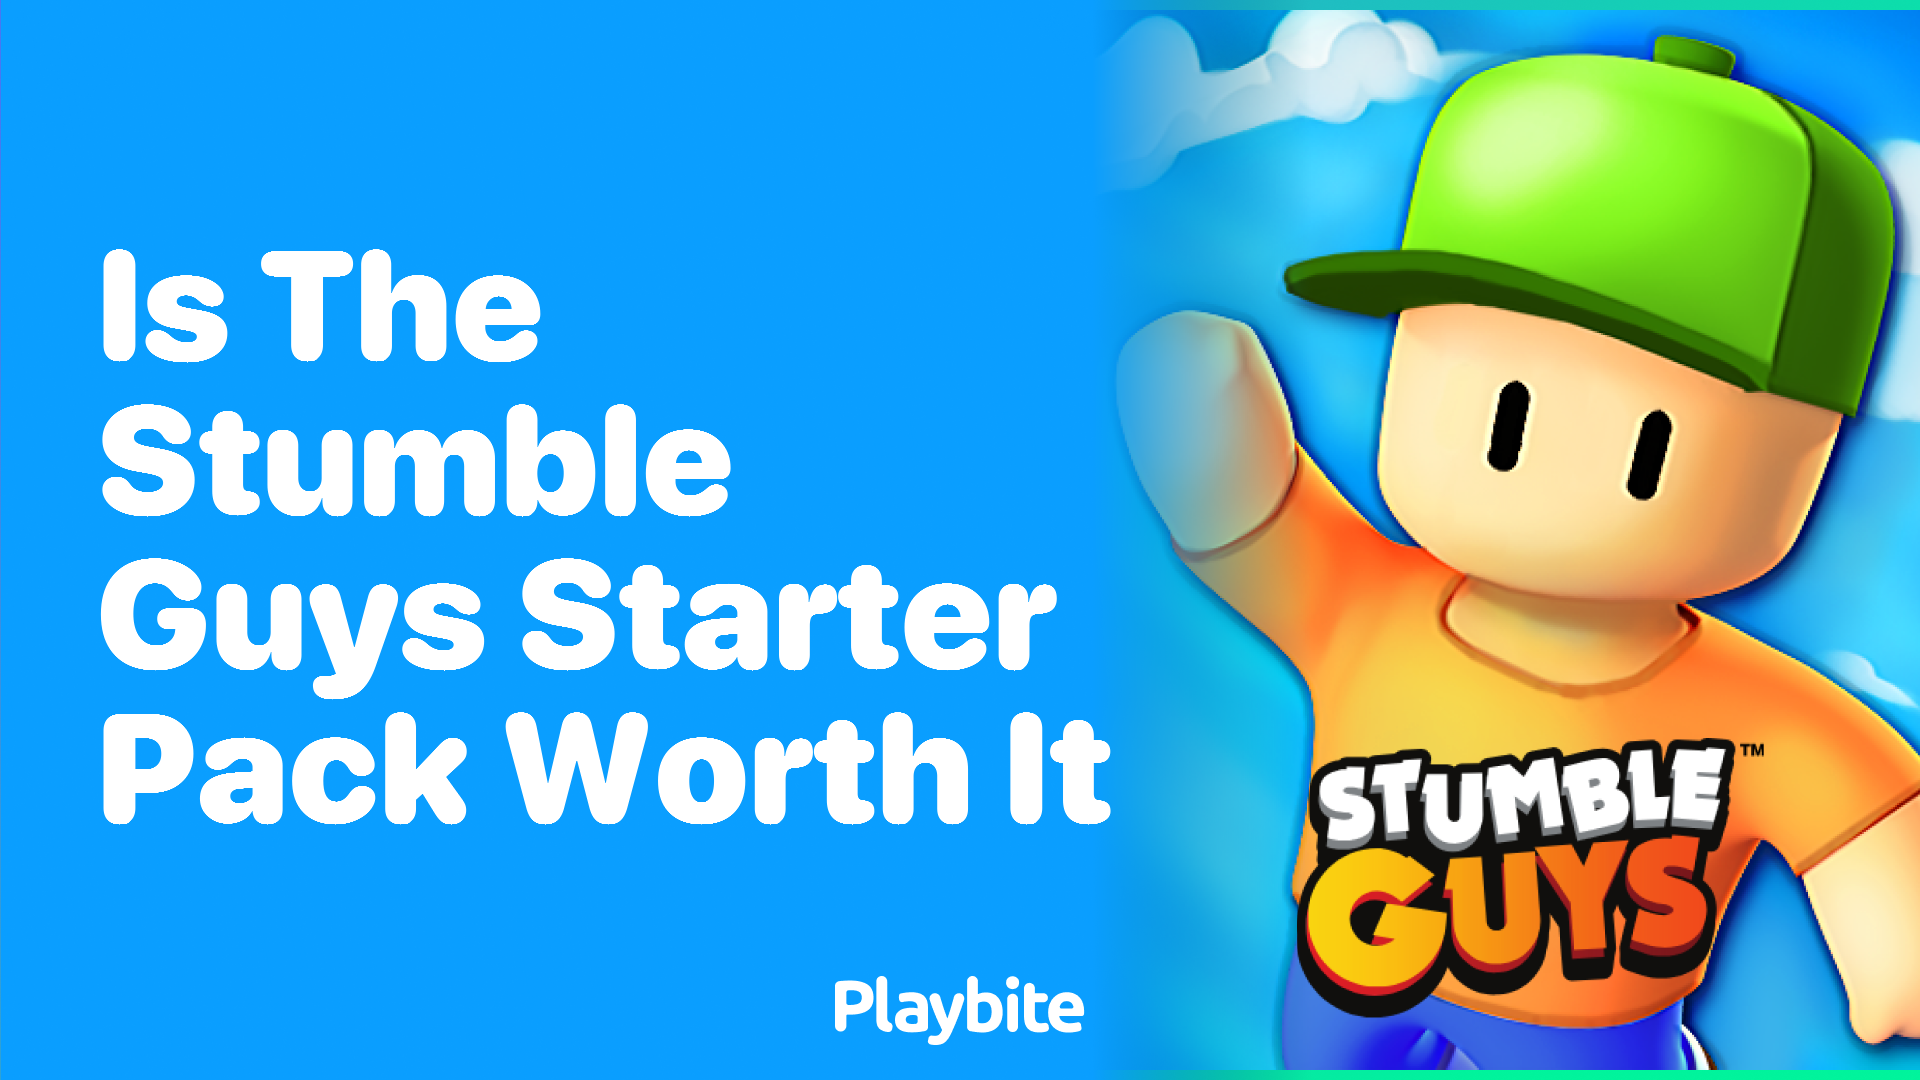 Is the Stumble Guys Starter Pack Worth It?